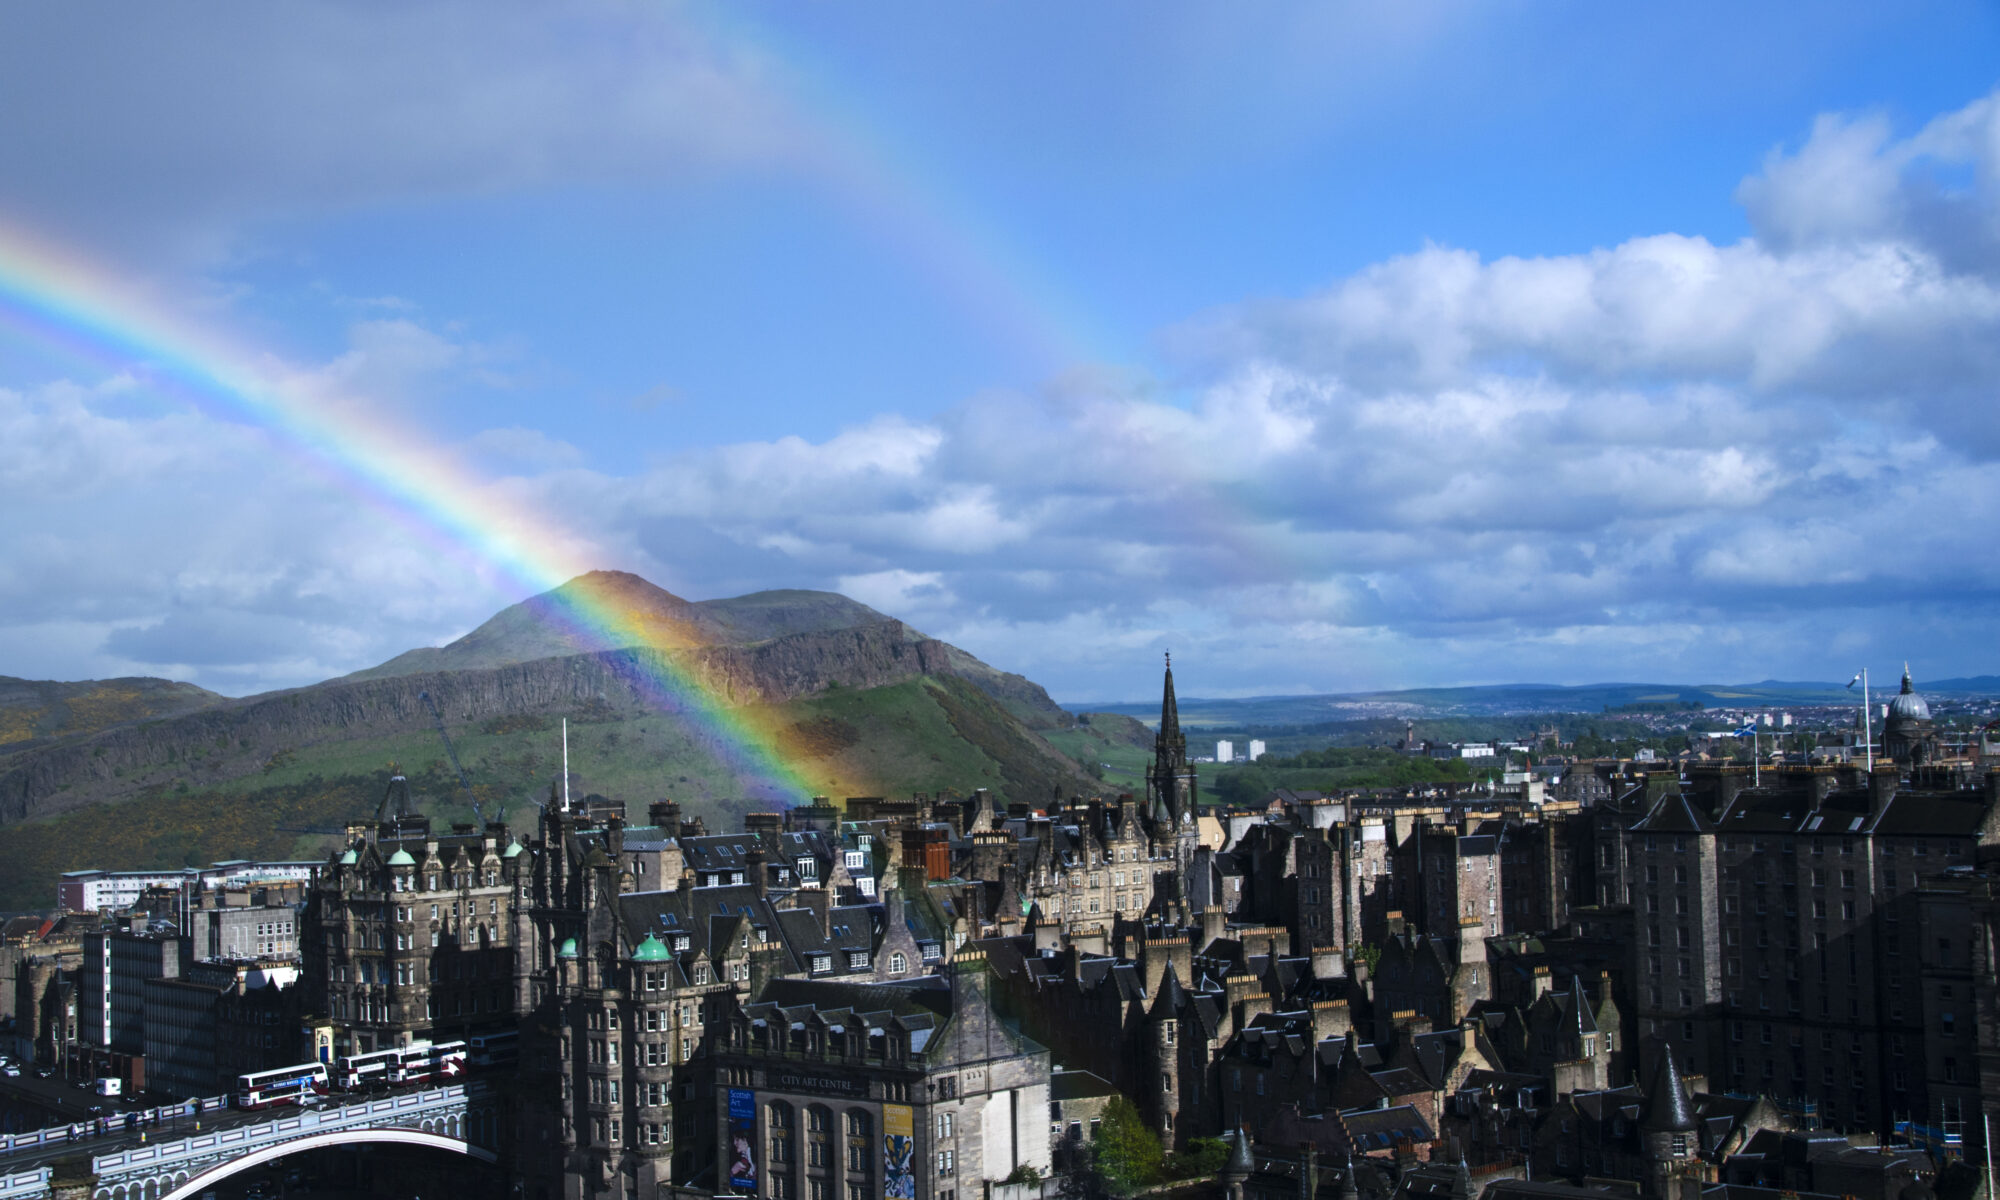 Double rainbow over Edinburgh, with Arthur's Seat in the background